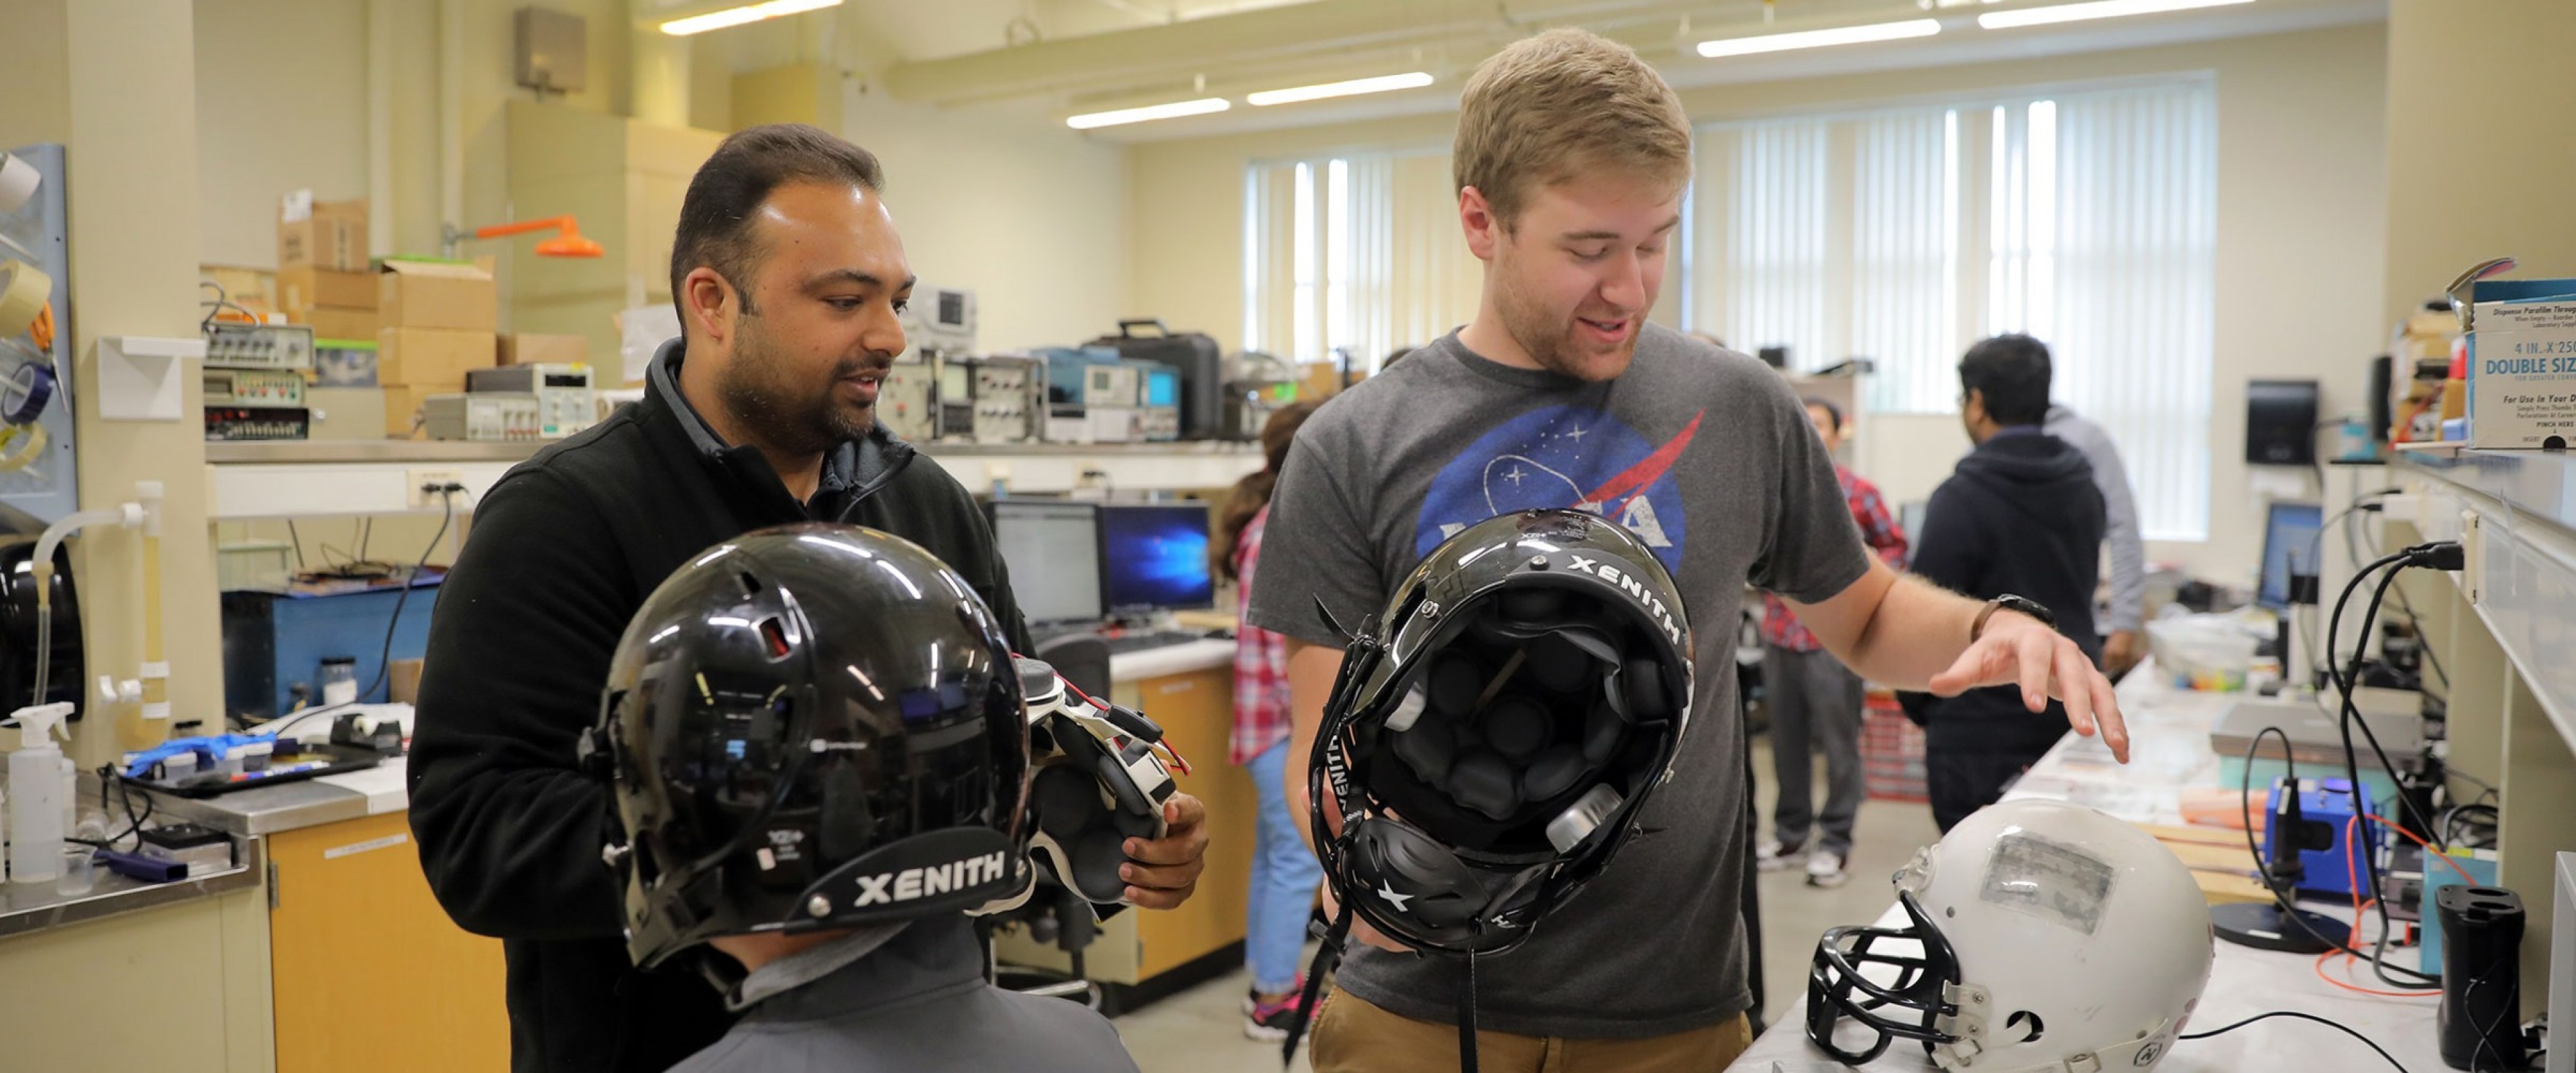 A WMU student and professor work together discussing the safety and design of the helmets they are holding